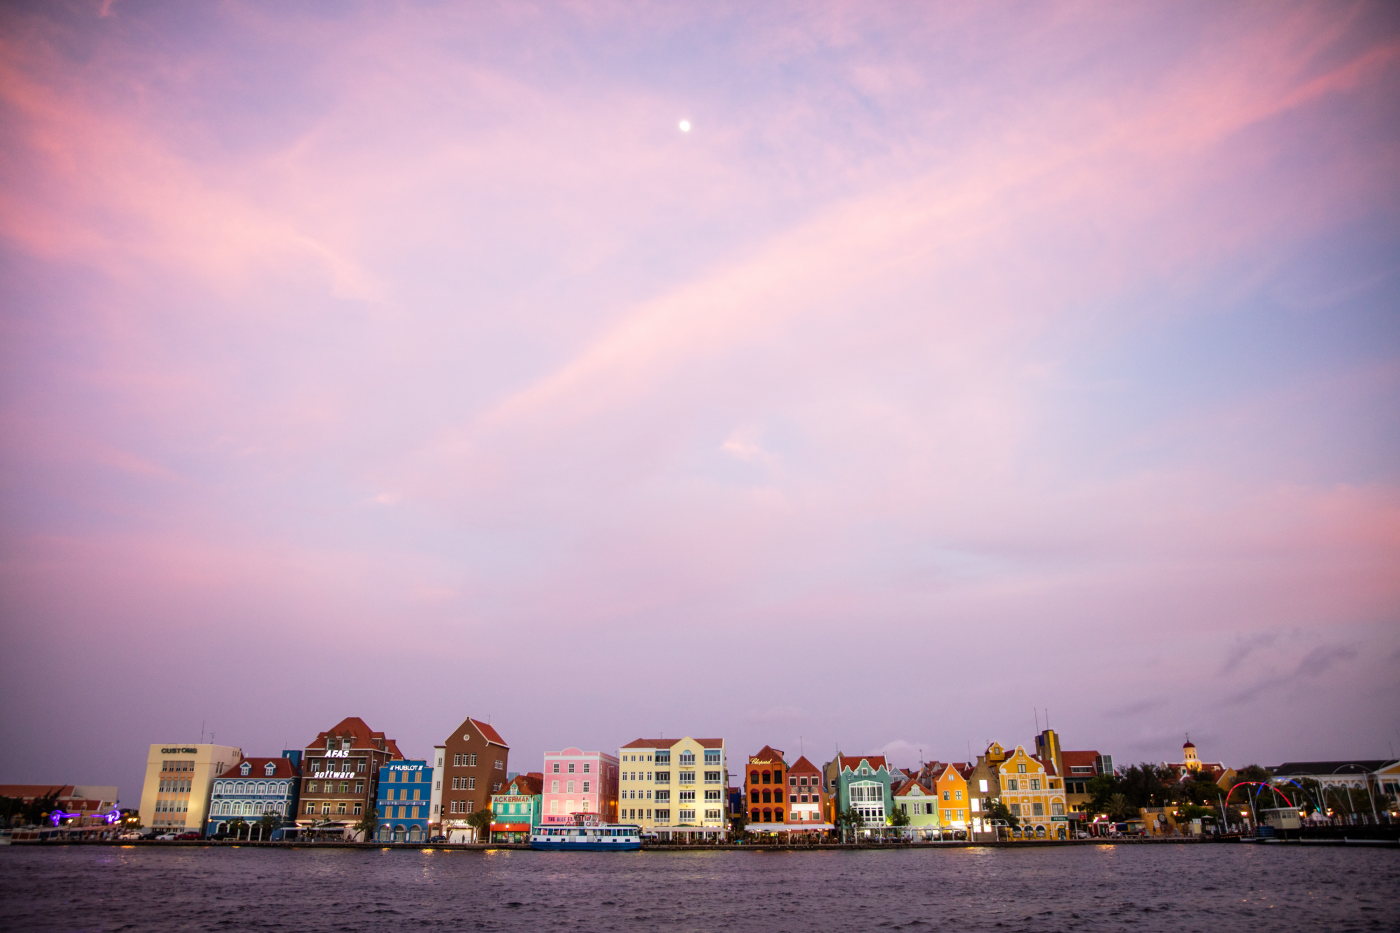 A view from the water of colorful buildings on the shoreline of Curacao under a pink and blue sky during the sunset